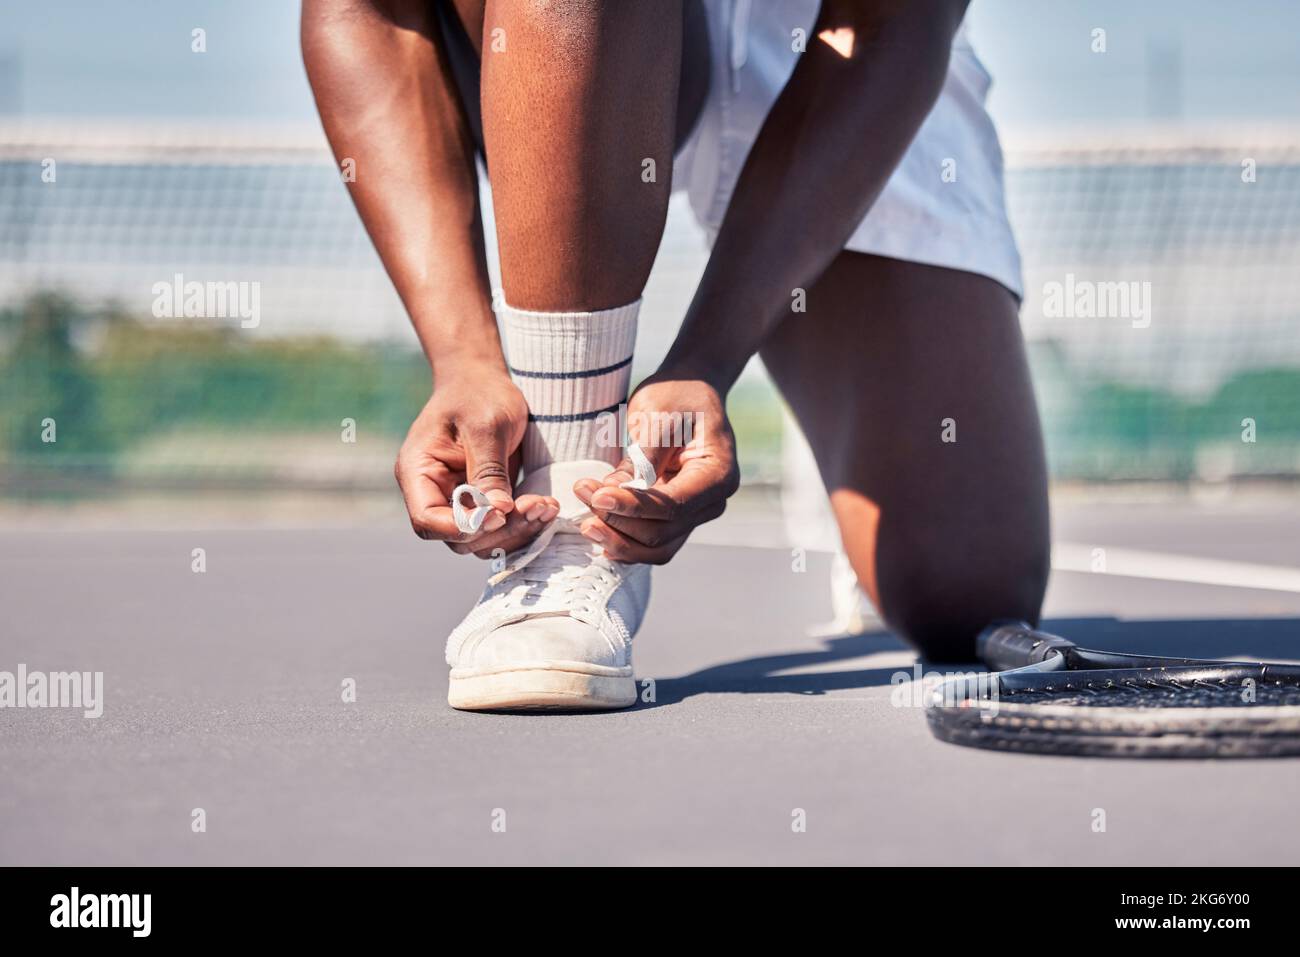 Sports, tennis and man tie shoes before game start, competition or fitness exercise on outdoor tennis court. Wellness health, ground and legs of Stock Photo